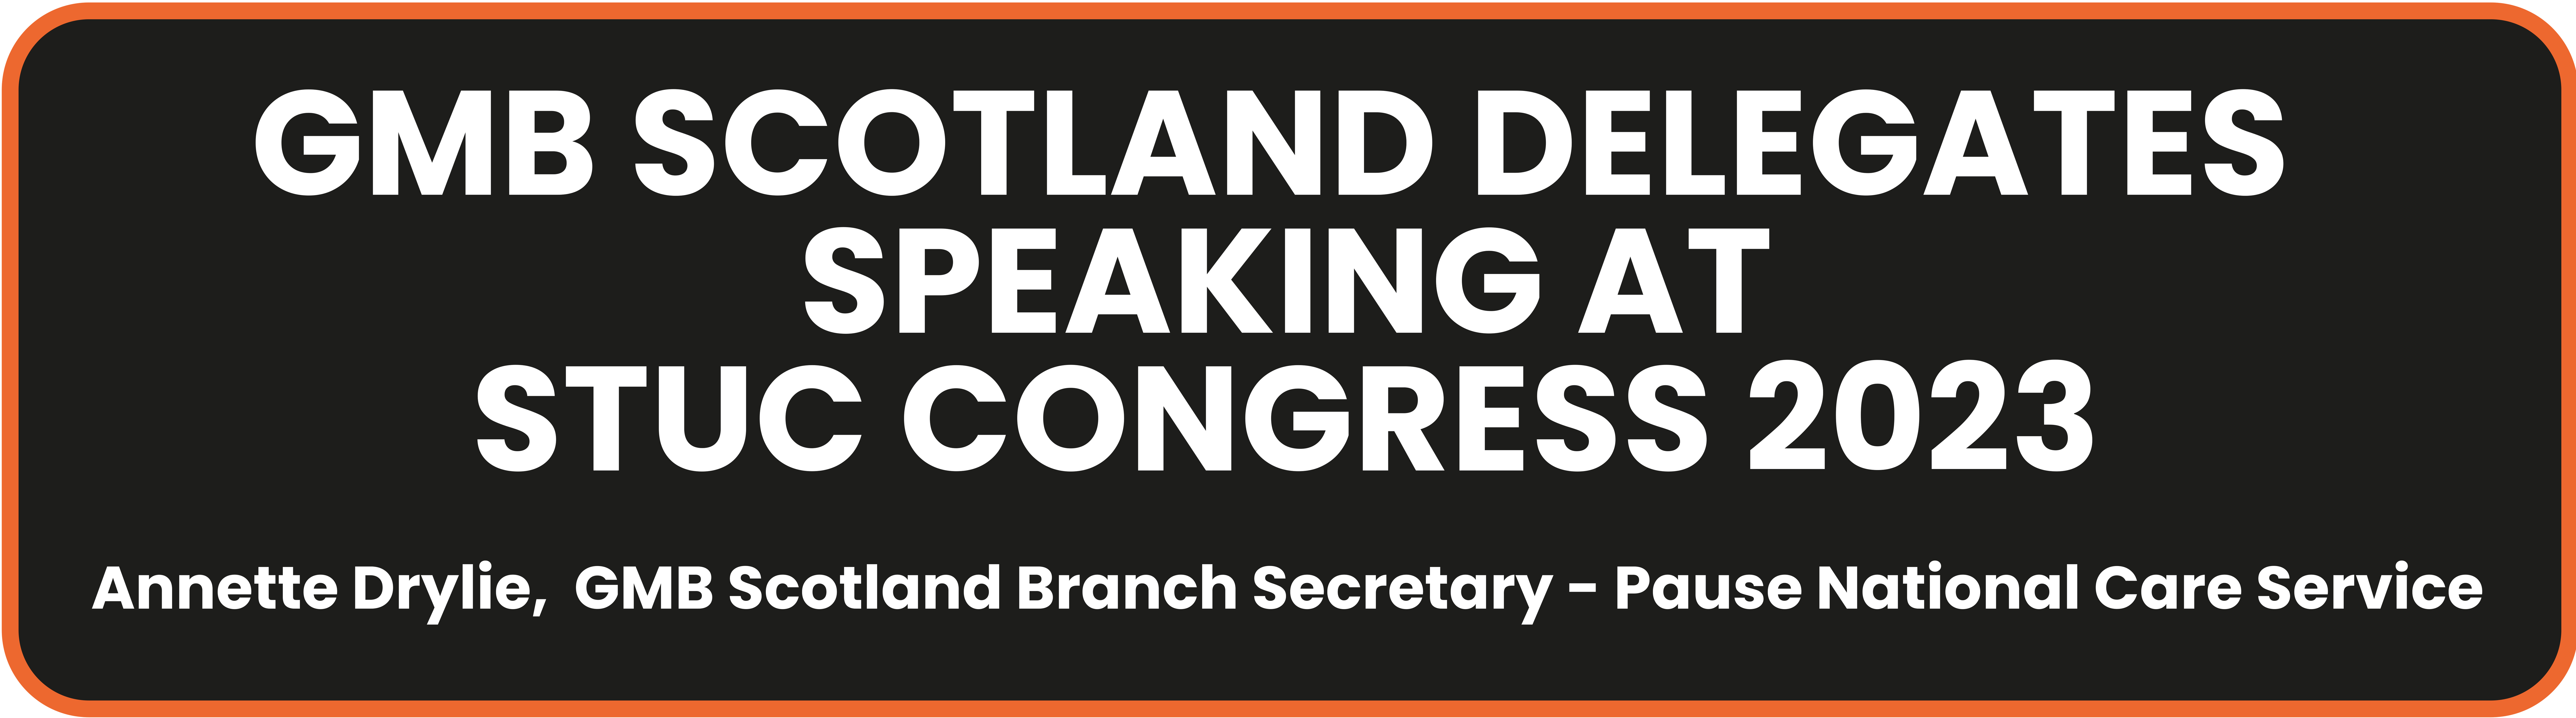 GMB Scotland at STUC: Pause National Care Service plan to protect services and staff